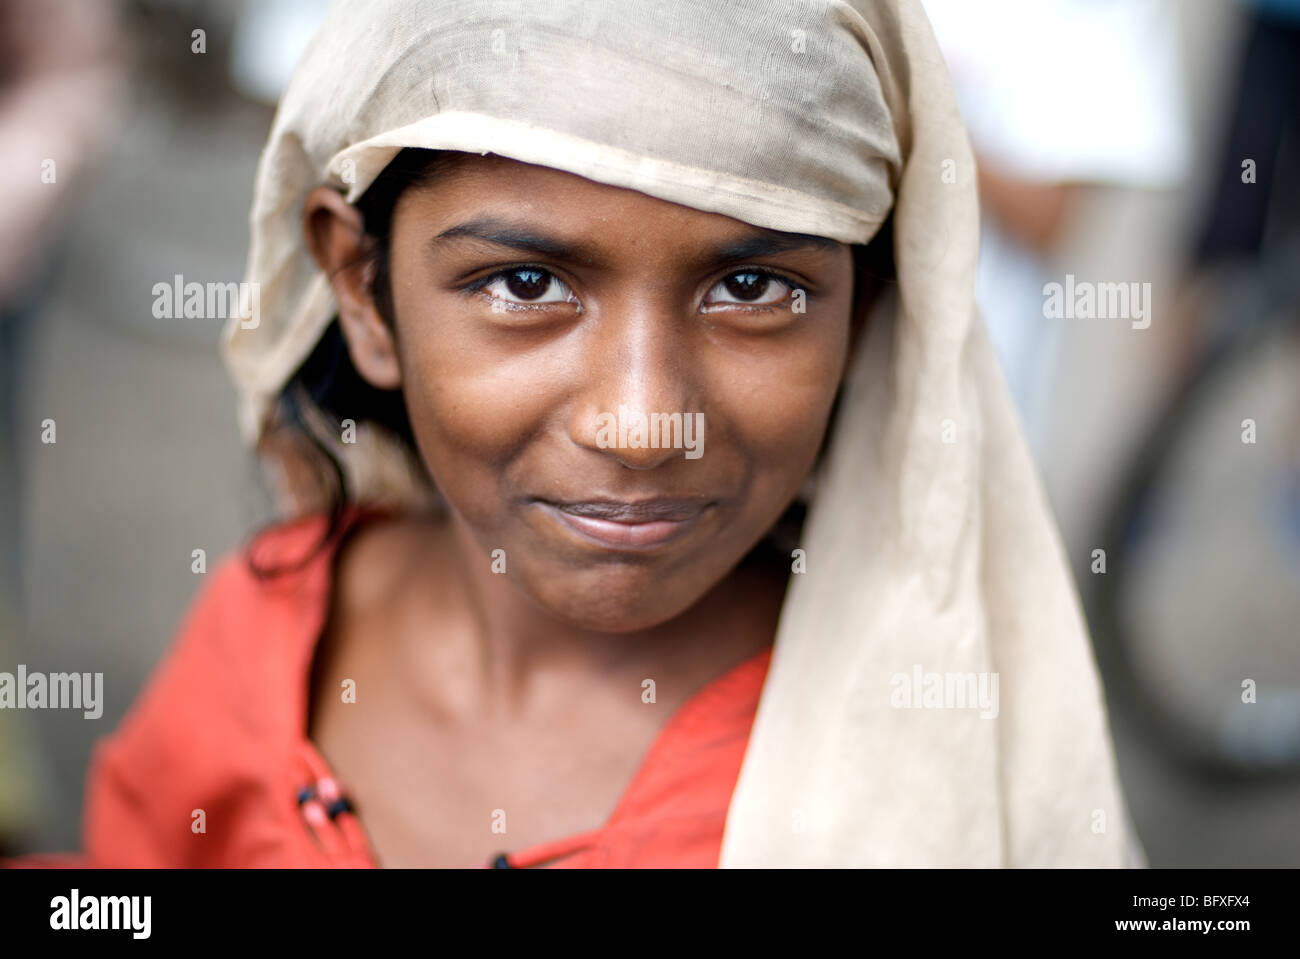 The striking face of an Indian girl in the slums of Surat, Gujart, India Stock Photo